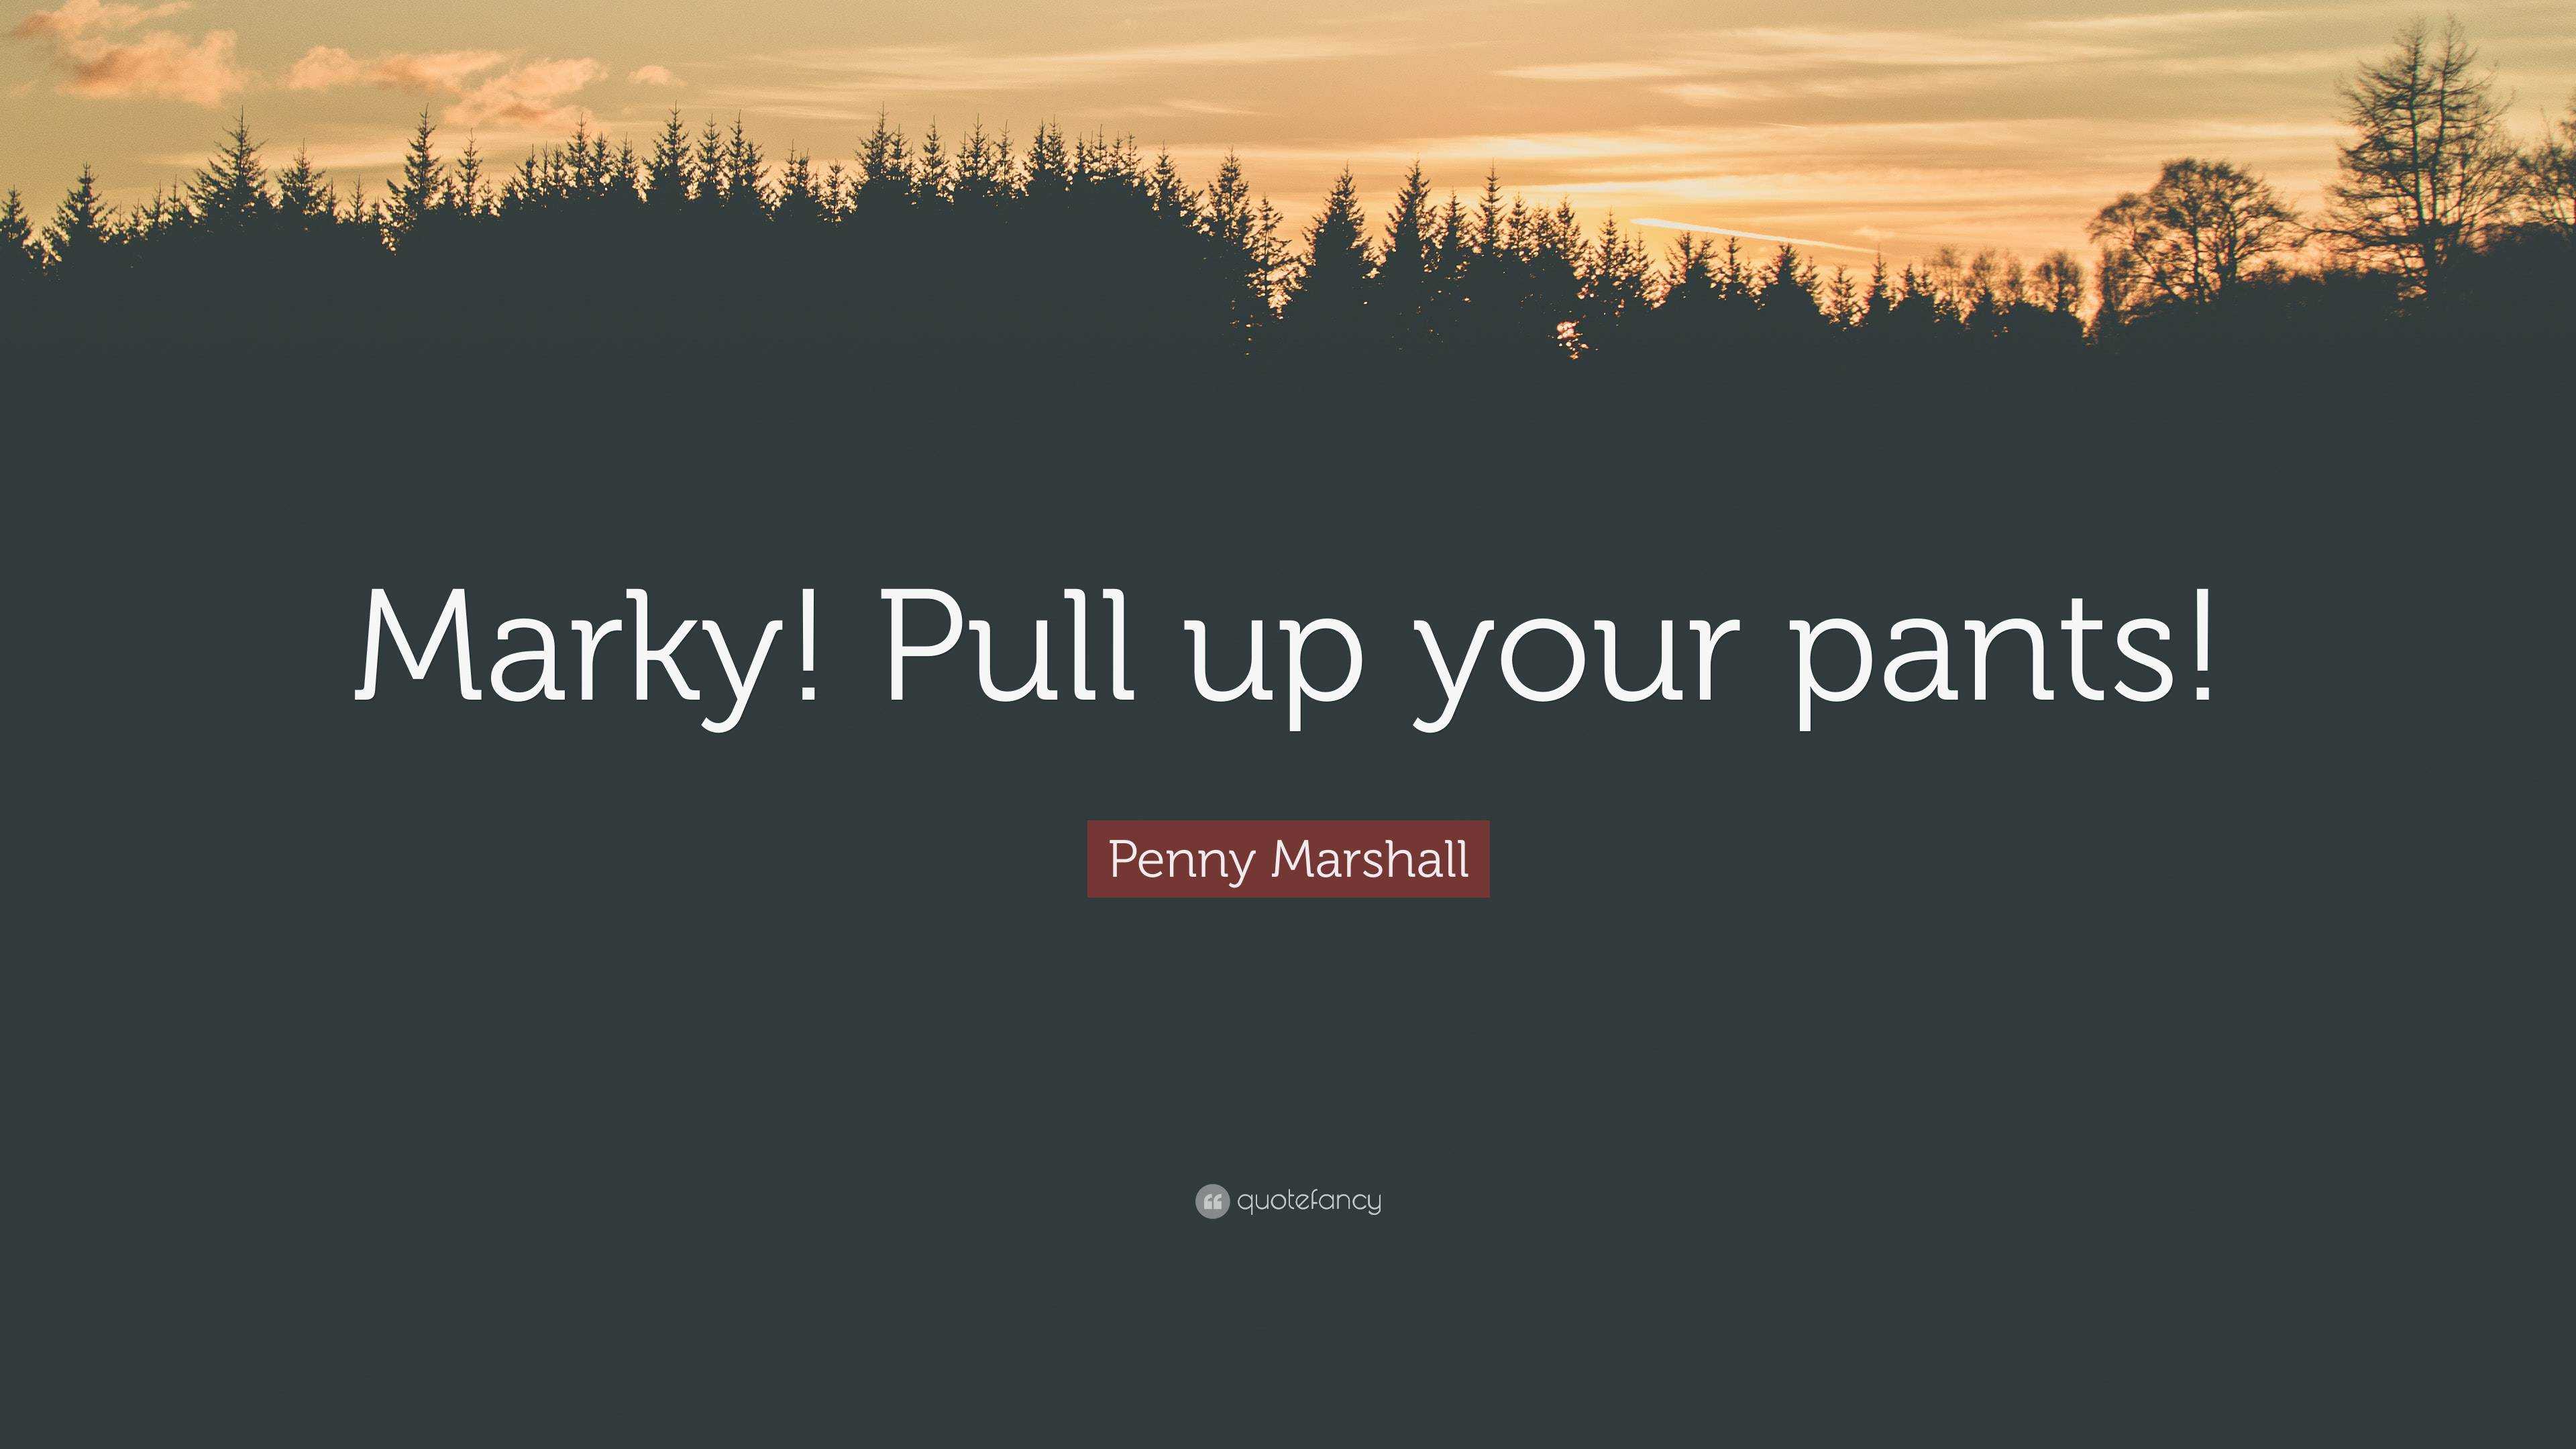 Penny Marshall Quote: “Marky! Pull up your pants!”